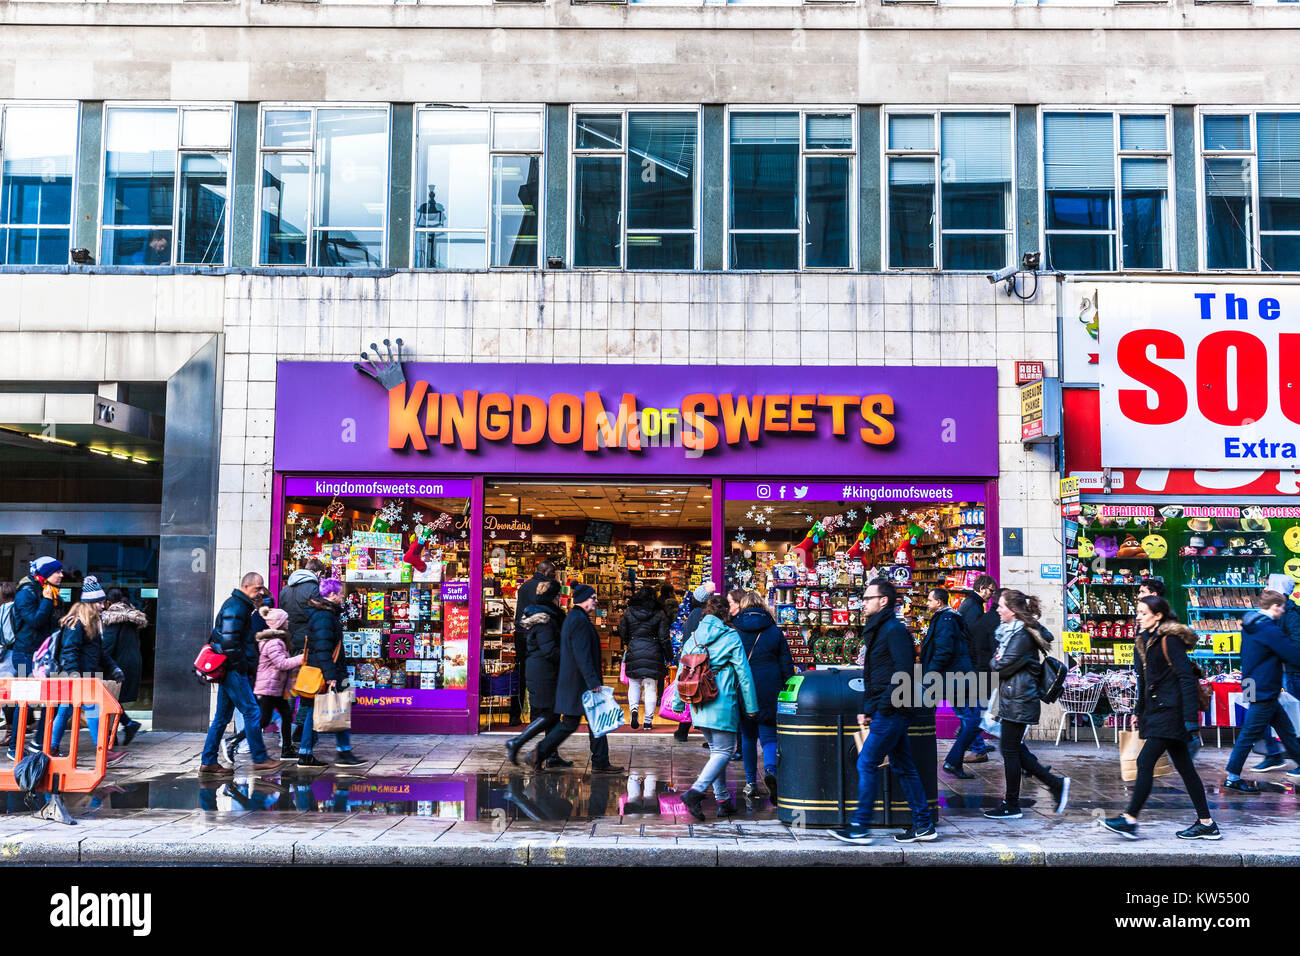 Kingdom of Sweets shop front, Oxford Street, London, England, UK. Stock Photo